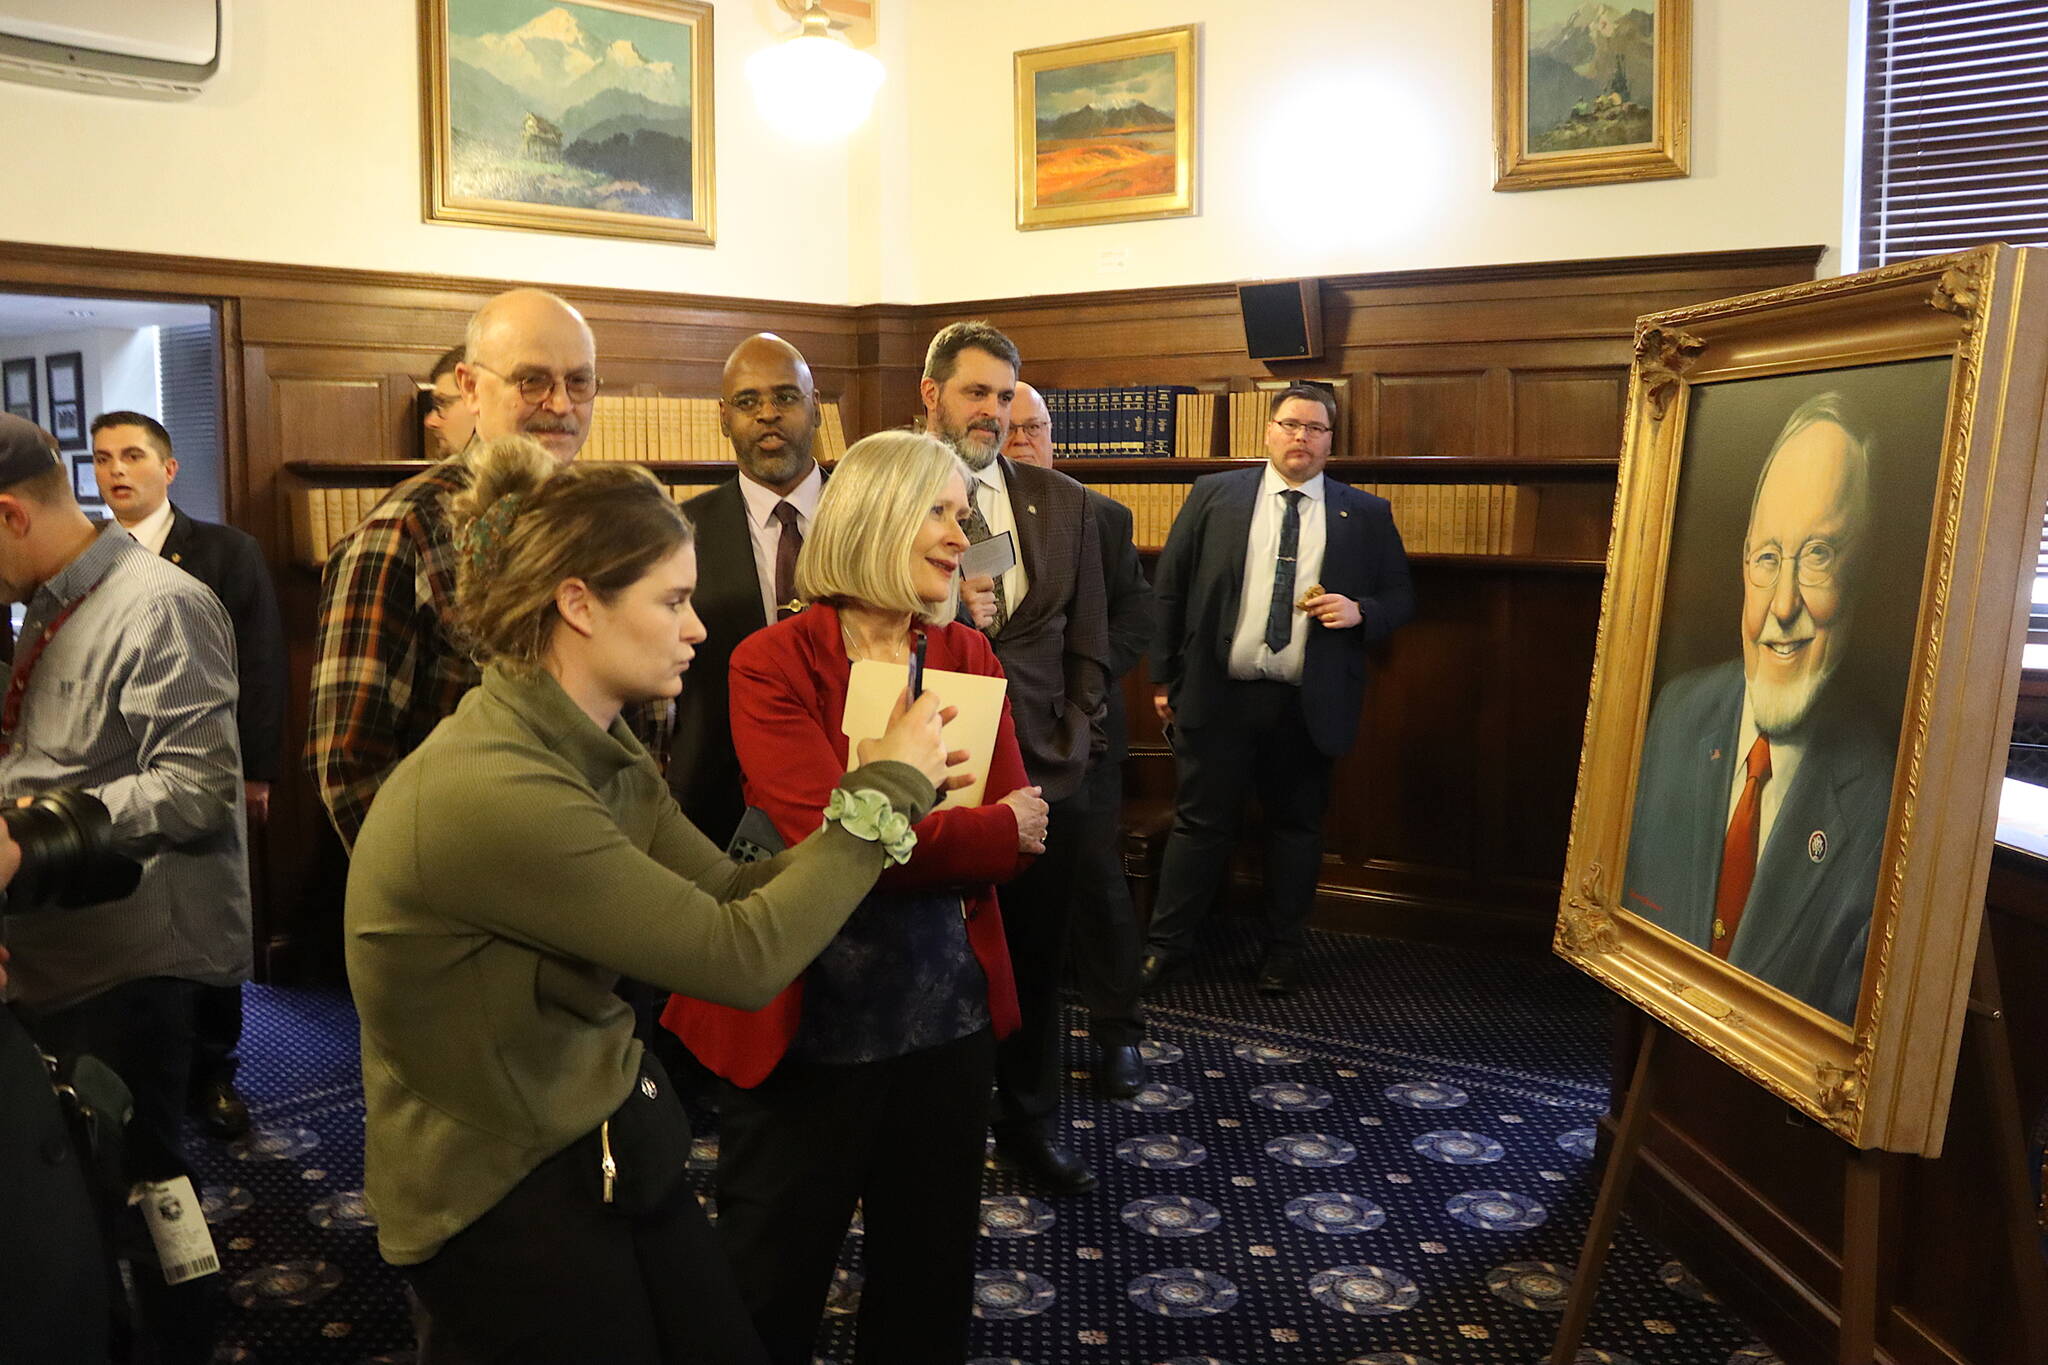 Legislators and other guests view a newly unveiled portrait of the late Congressman Don Young on Monday, the second anniversary of his death, to be in the Alaska State Capitol. (Mark Sabbatini / Juneau Empire)